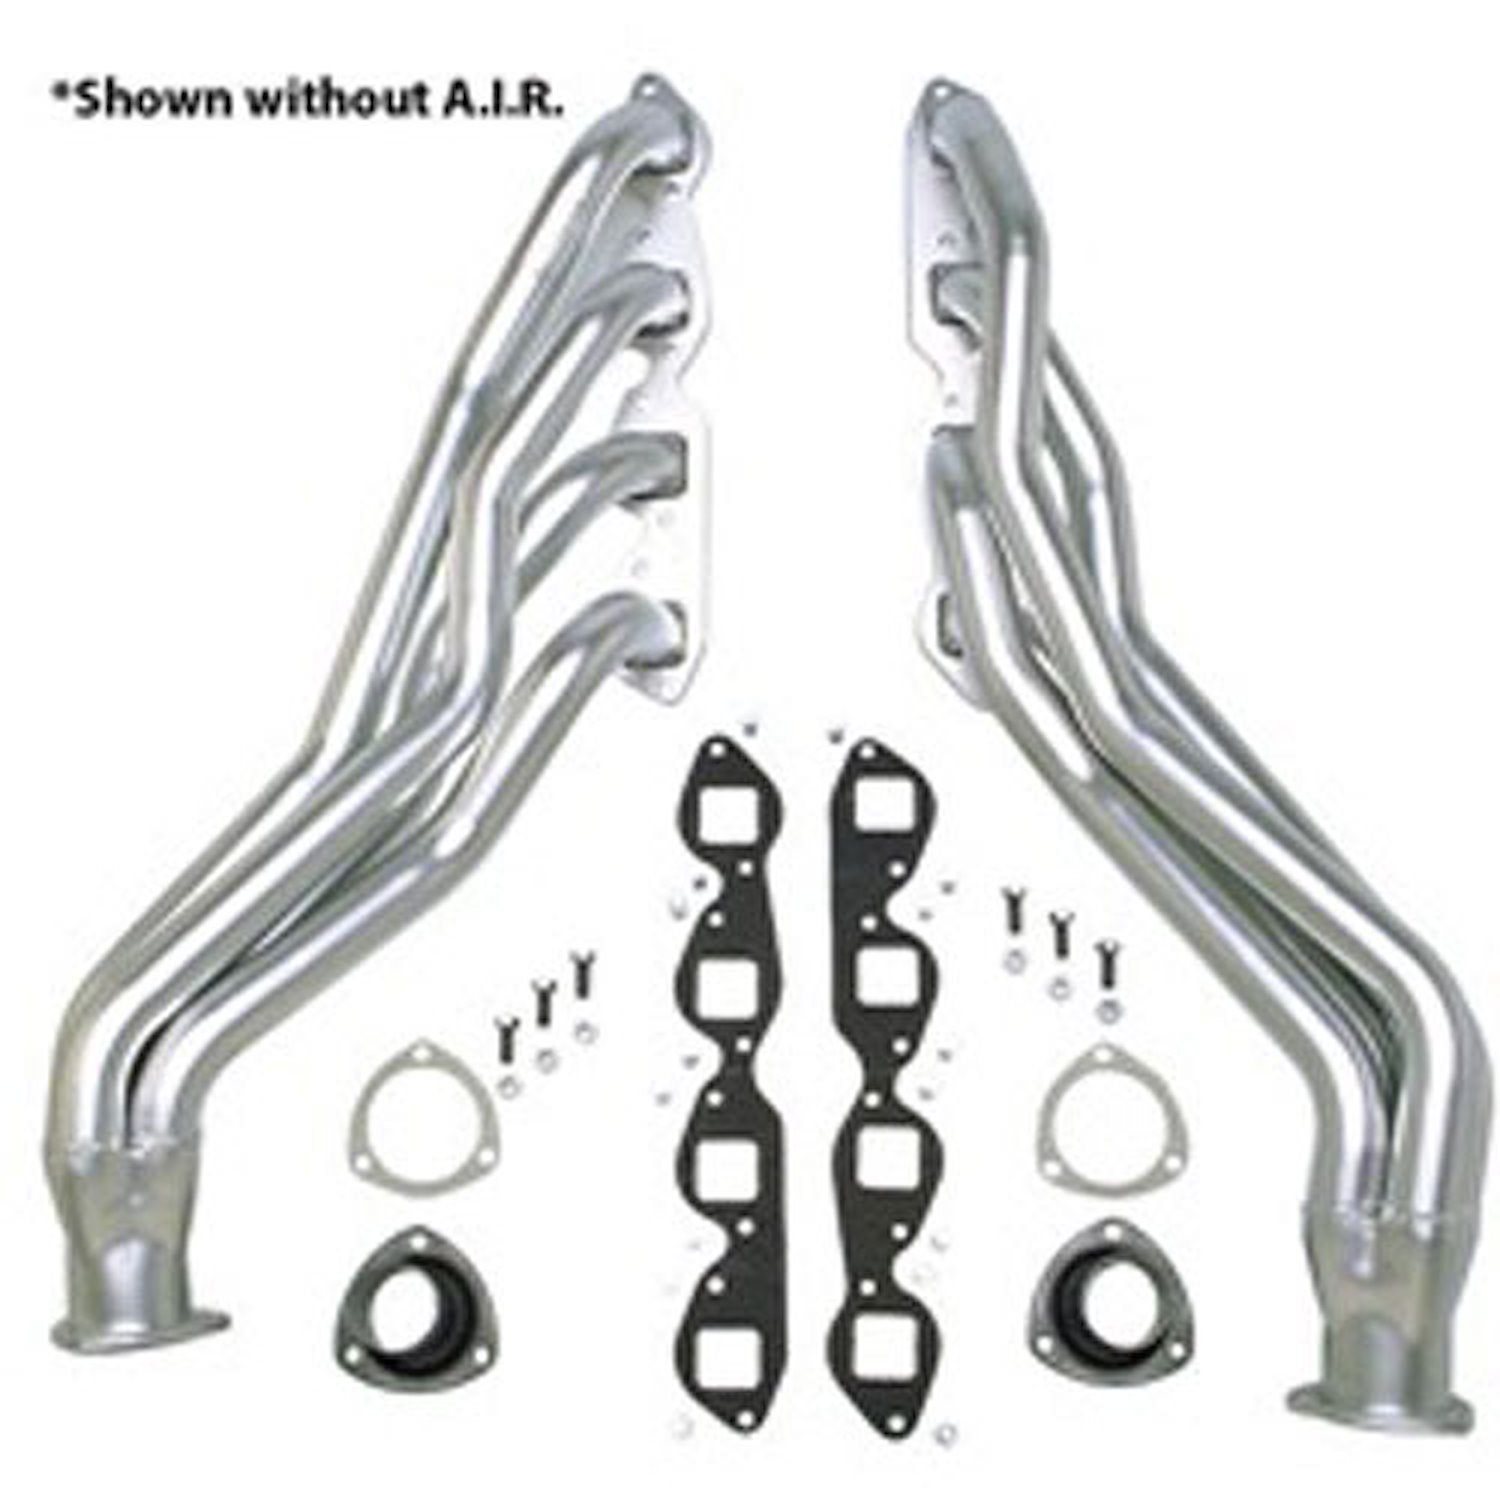 Elite Ultra-Duty HTC Coated Full Length Headers 1988-95 Chevy/GMC P/U 2500/3500 7.4L 2WD, with Air Tubes